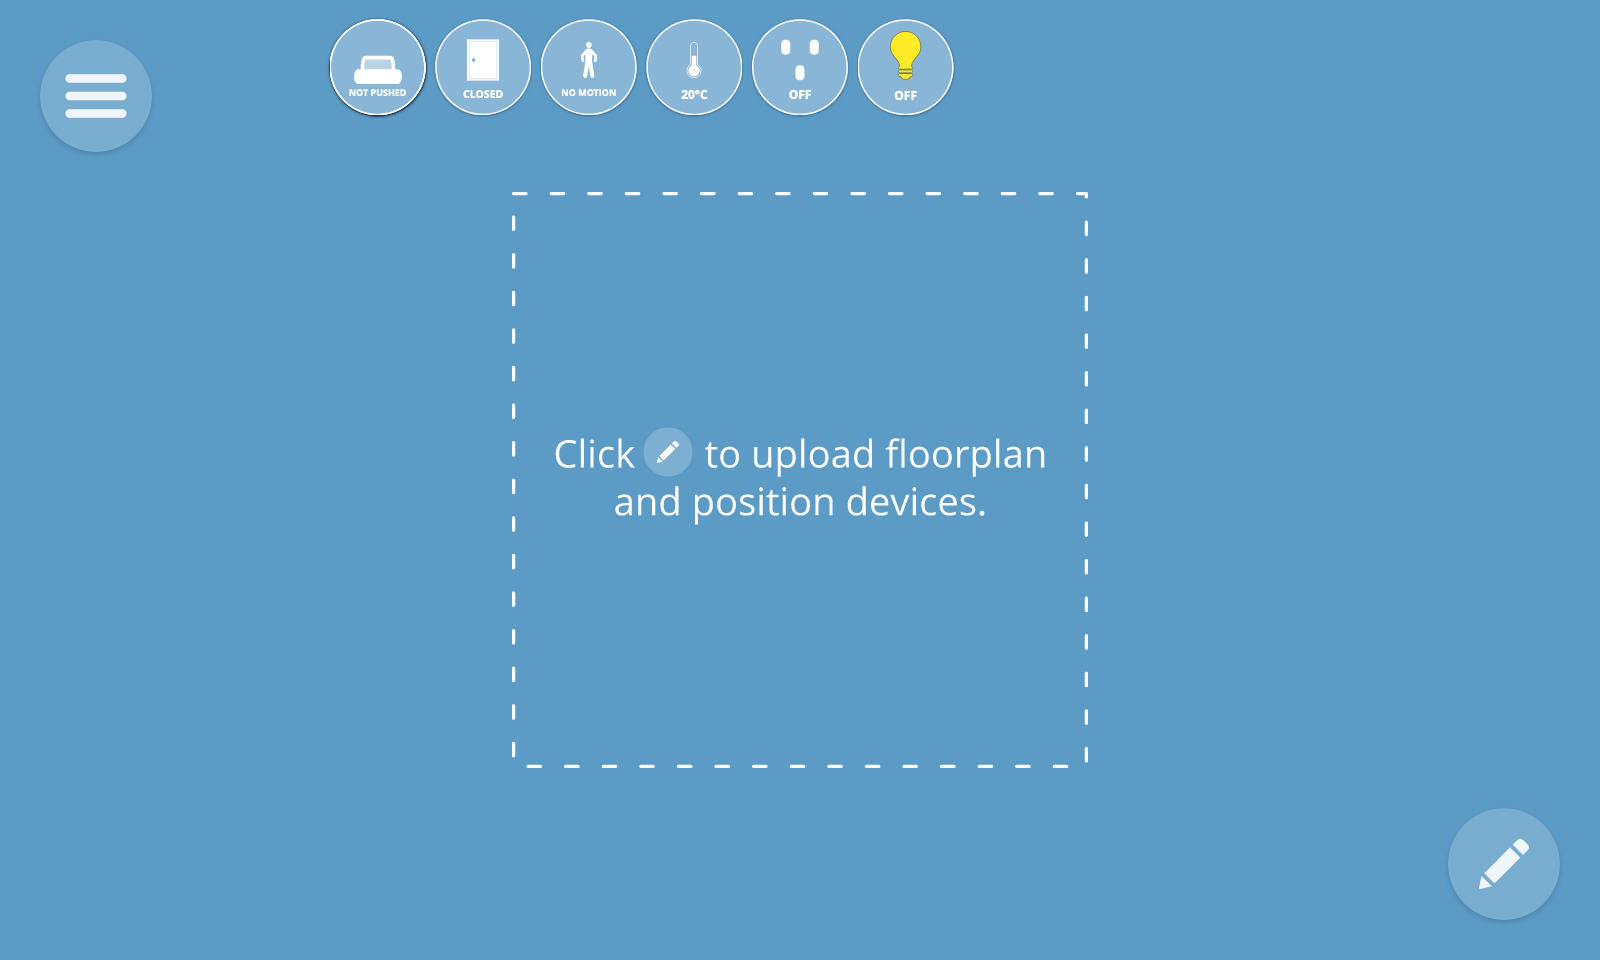 Screenshot of the floorplan view without a floorplan uploaded